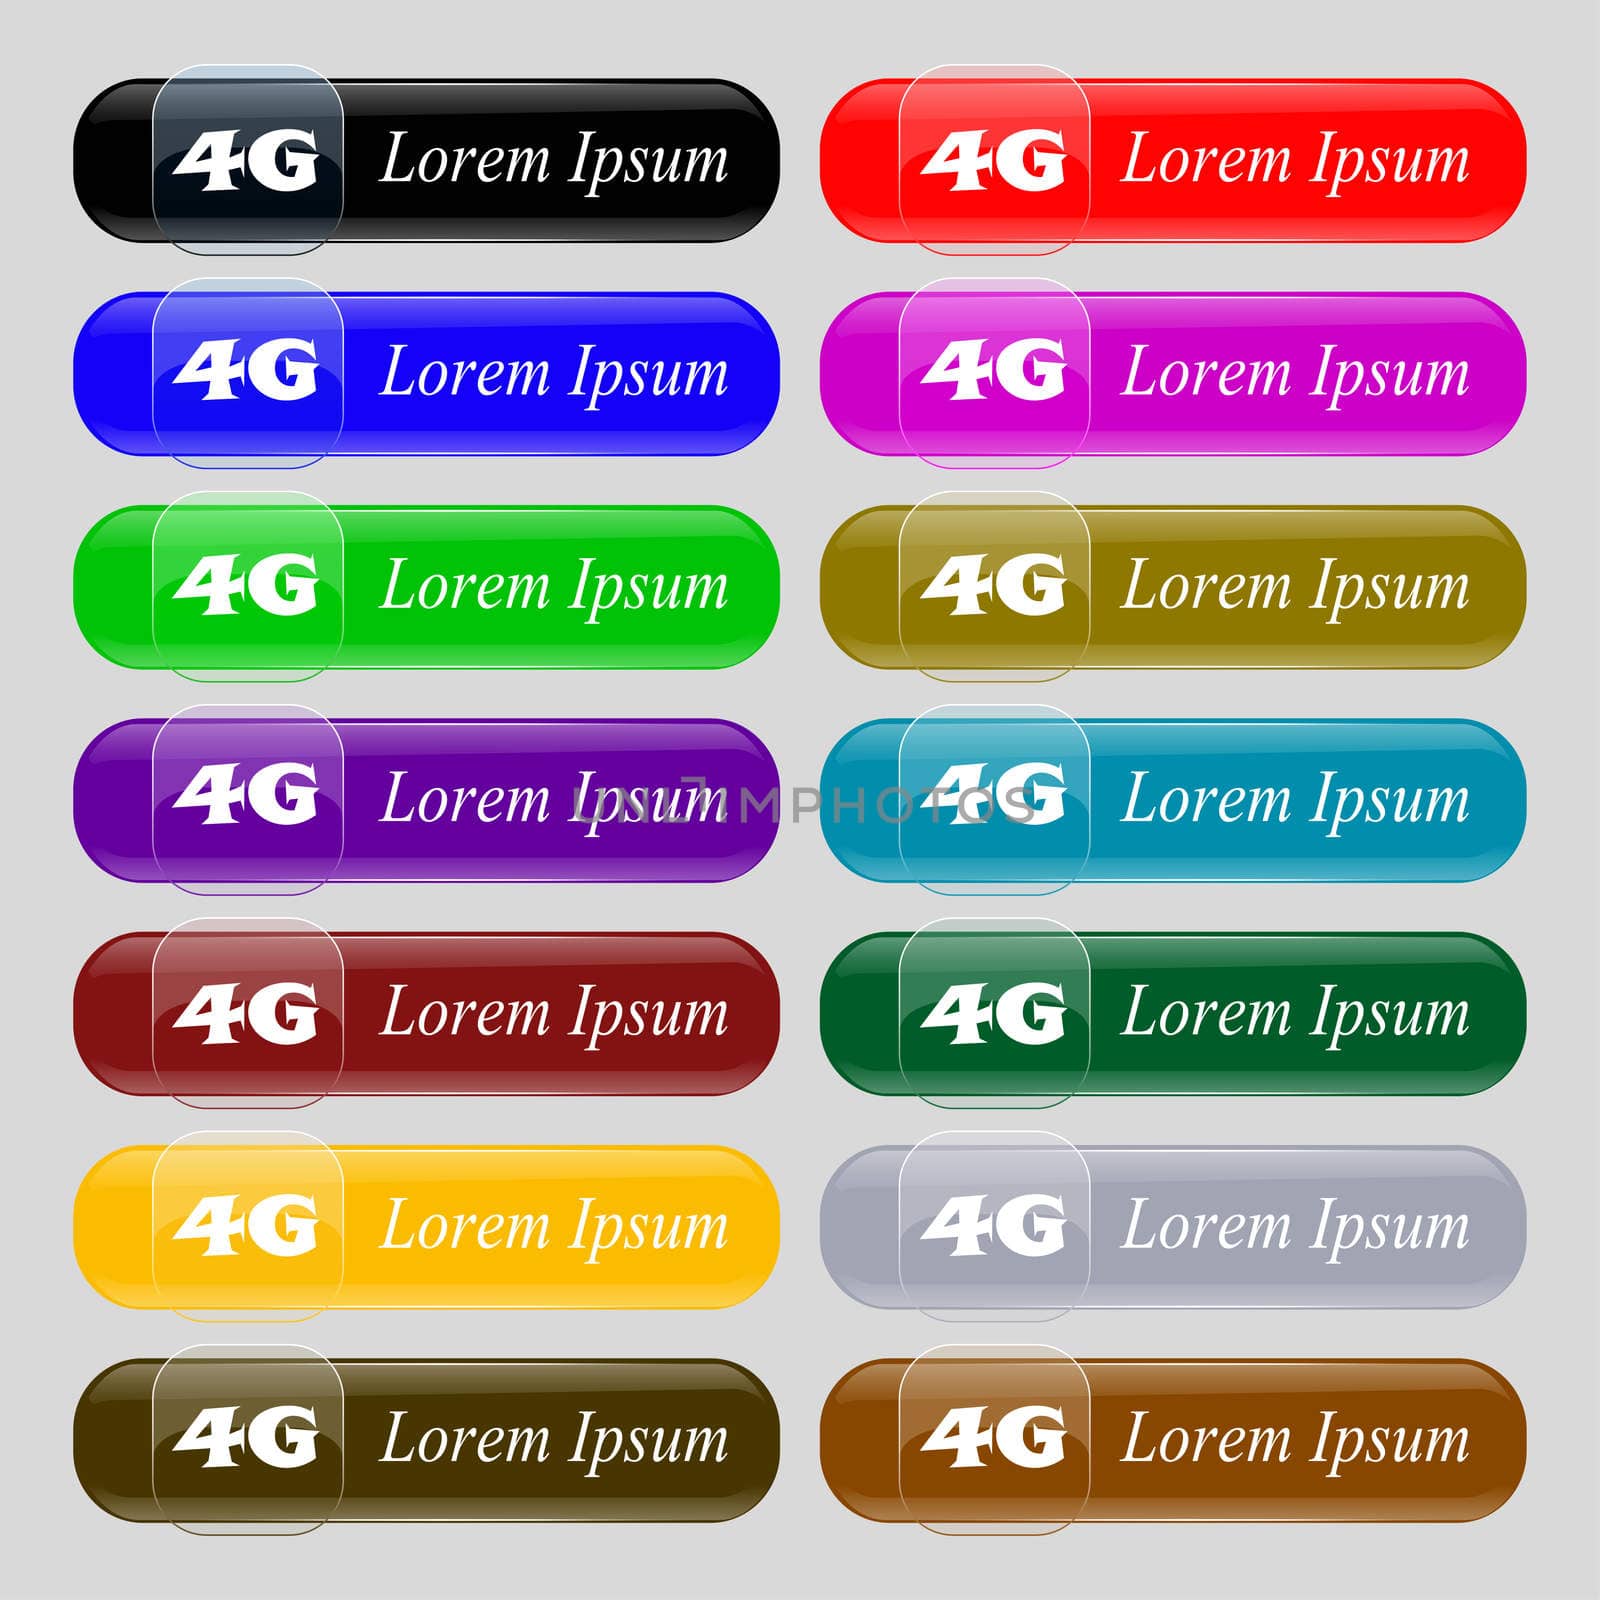 4G sign icon. Mobile telecommunications technology symbol. Set of colour buttons. illustration